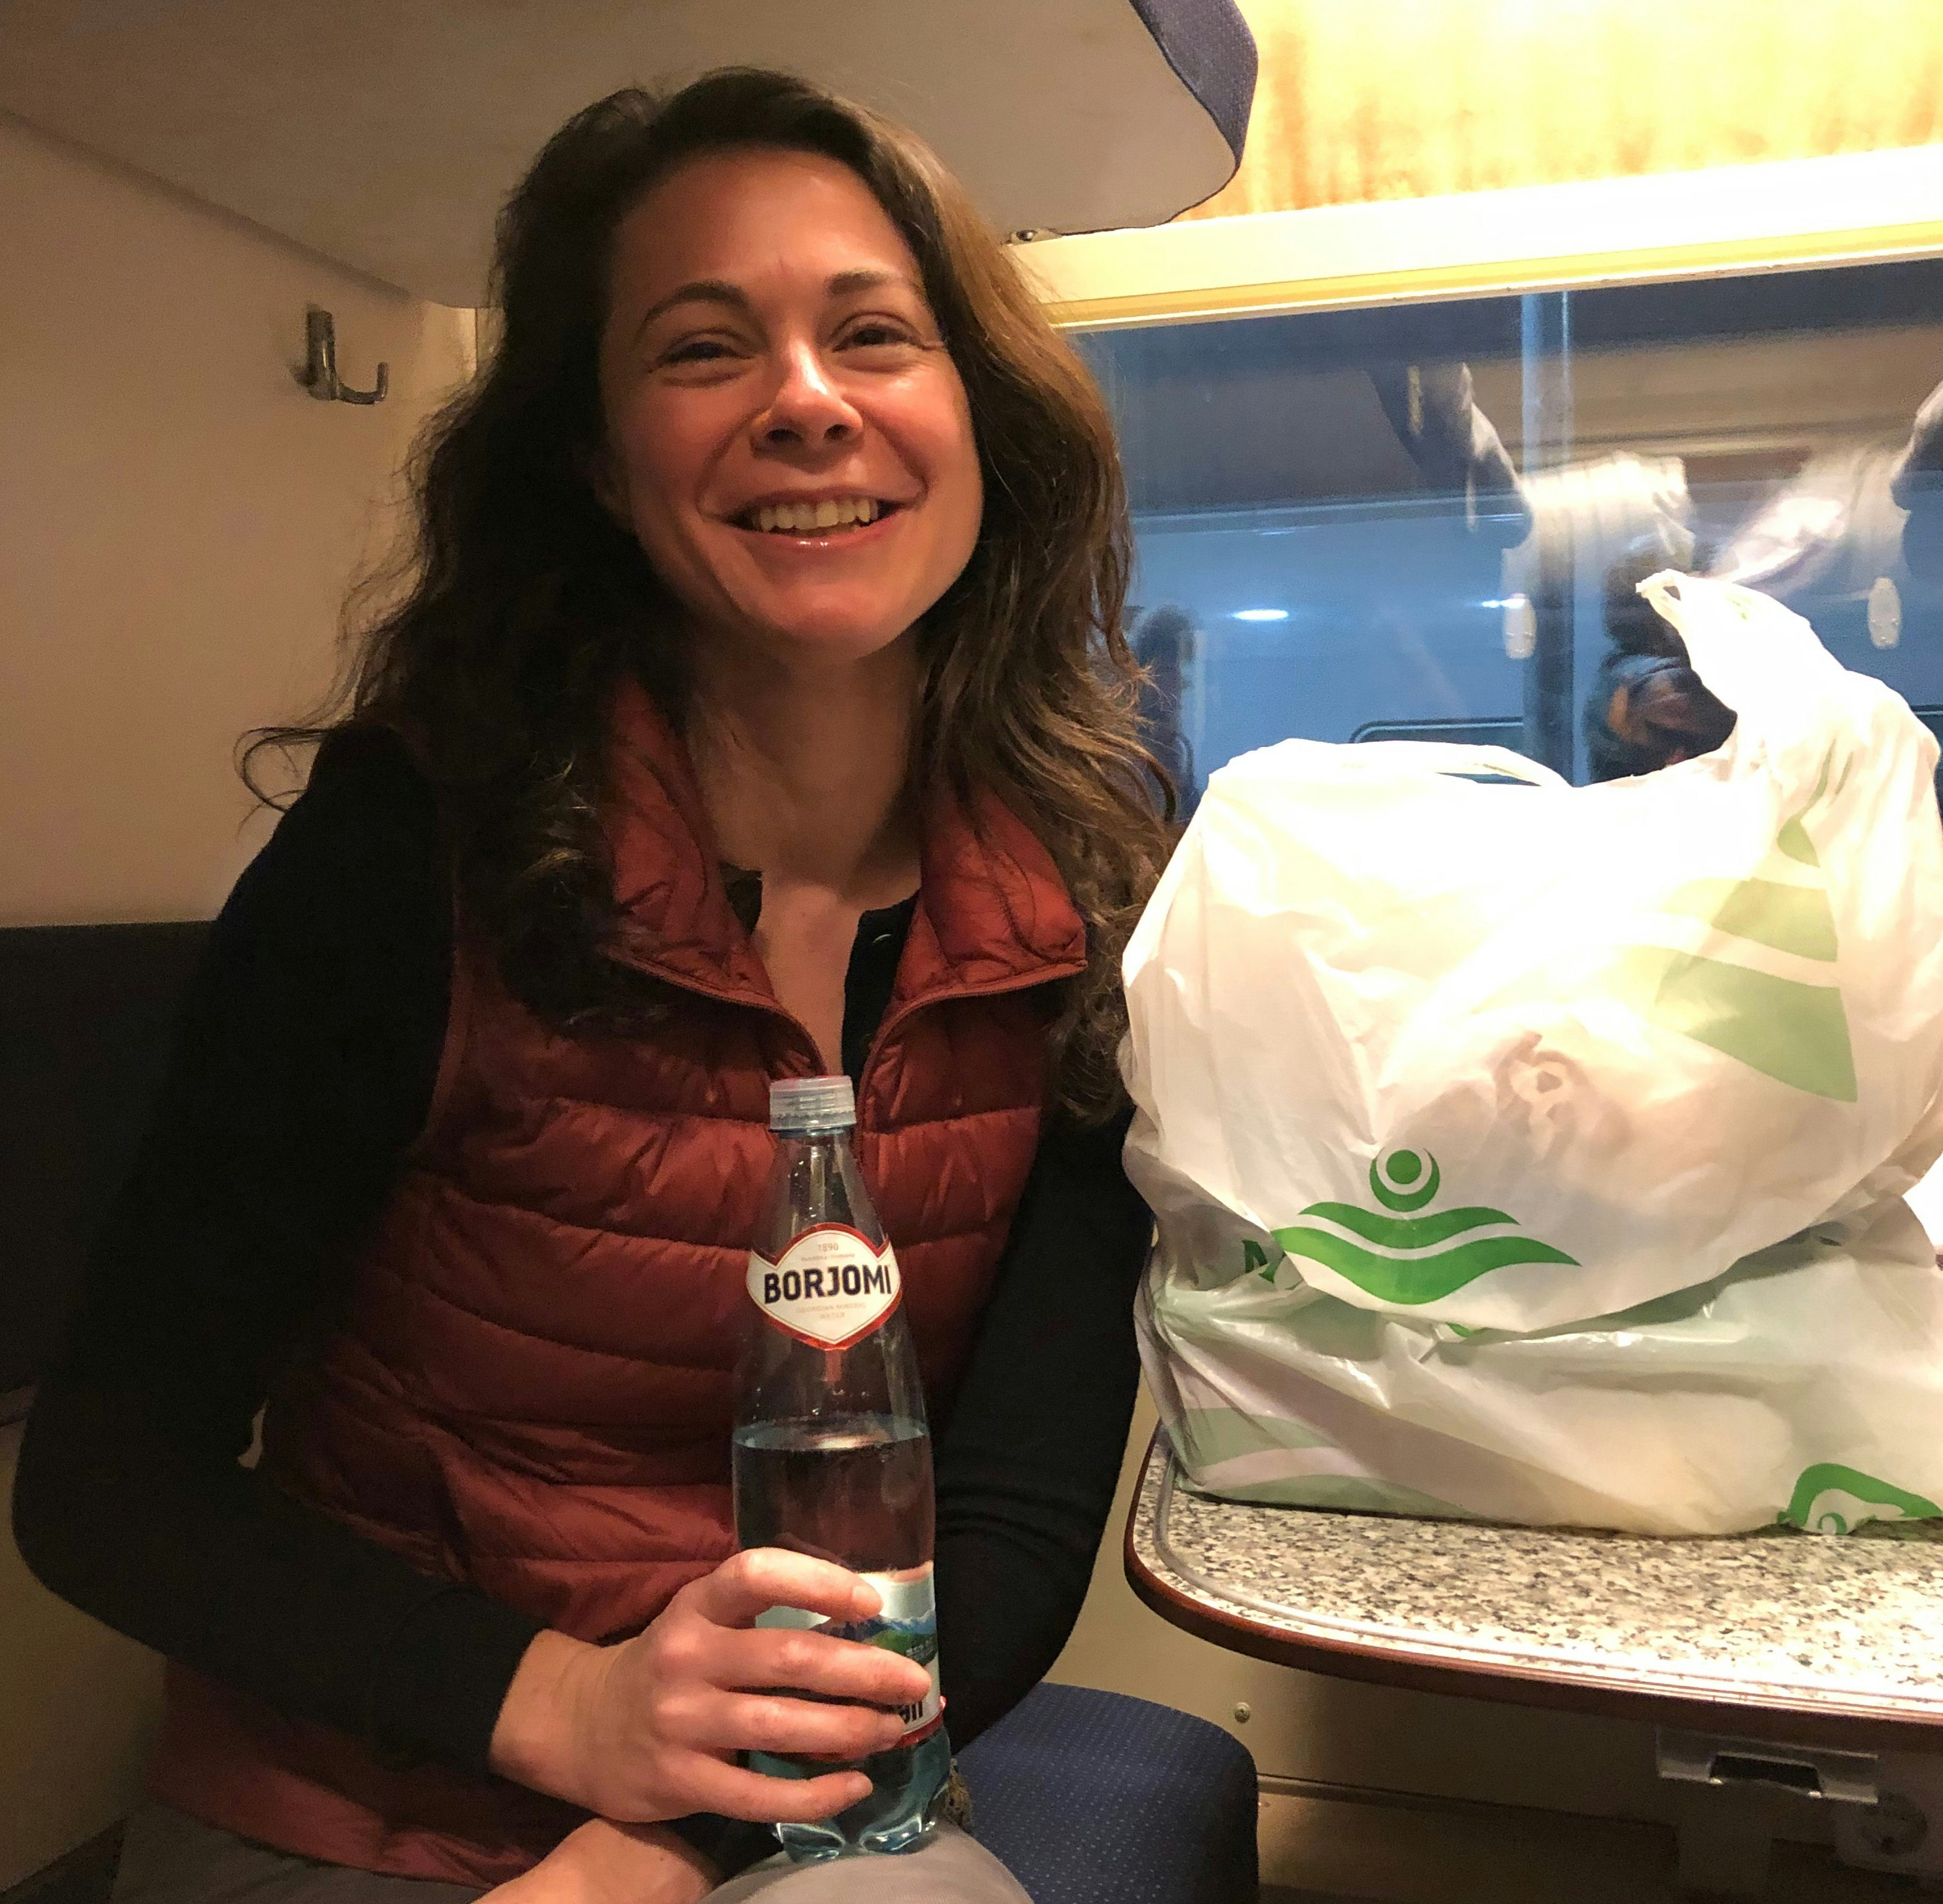 Writer Susie Armitage smiles at the camera as she sits on the bed in a small train sleeping compartment. There is a plastic bag containing groceries on a table.